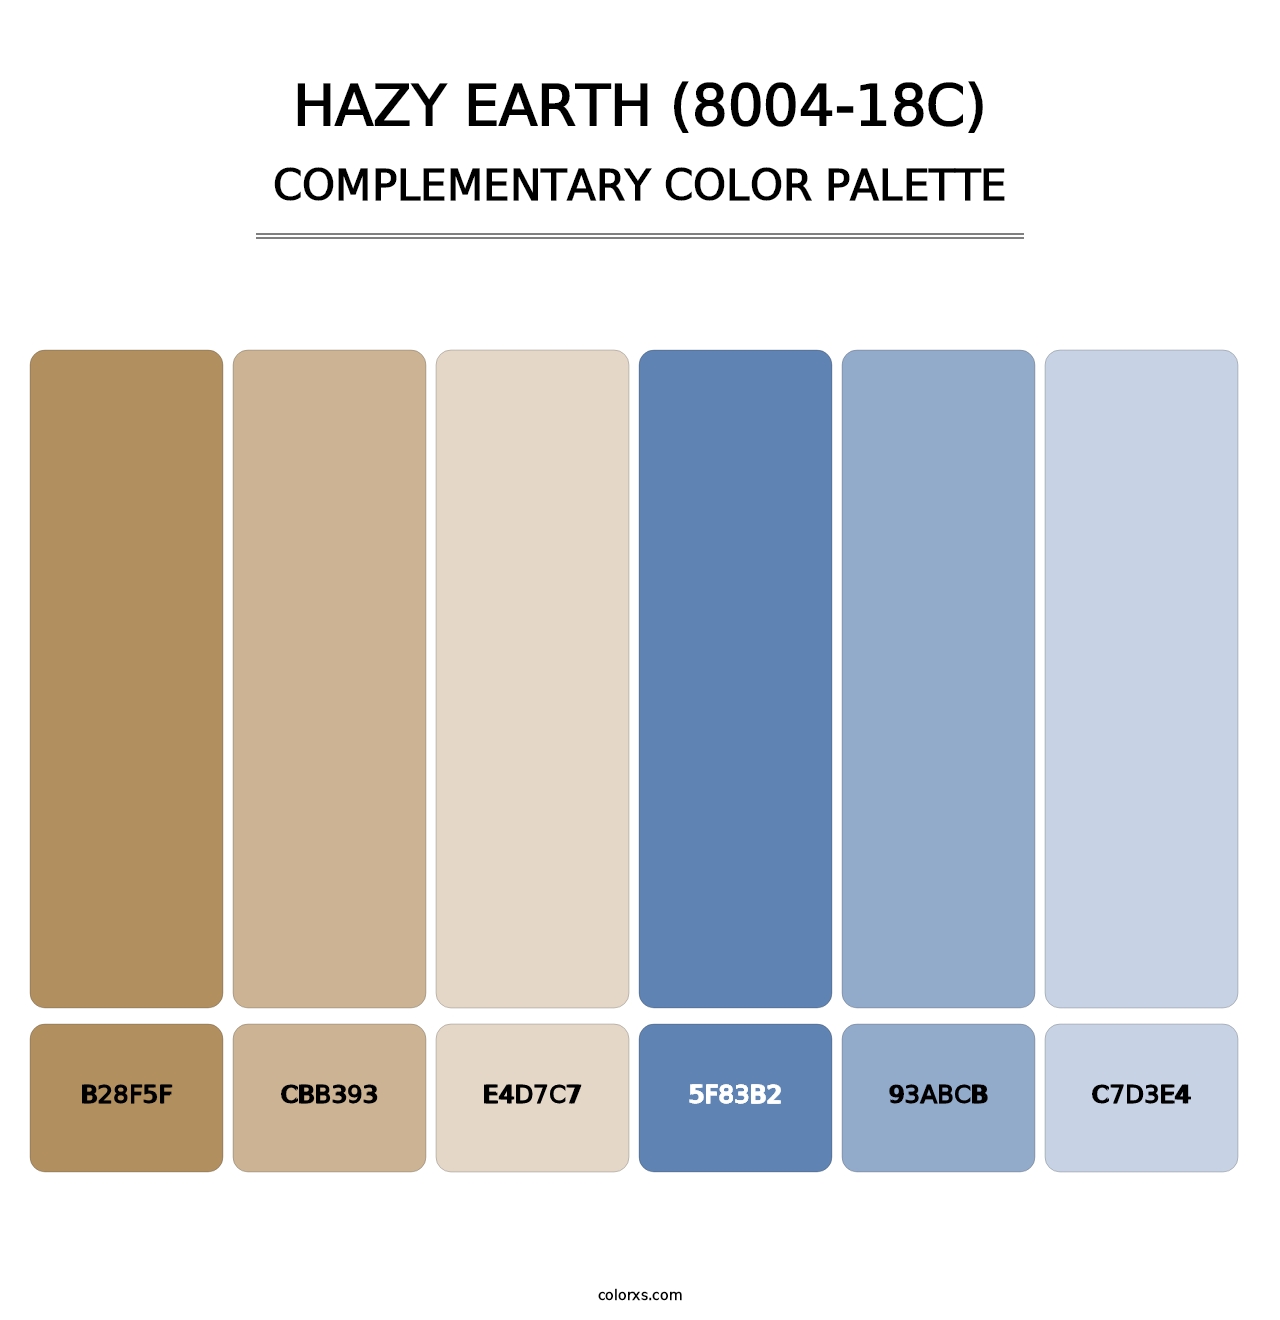 Hazy Earth (8004-18C) - Complementary Color Palette